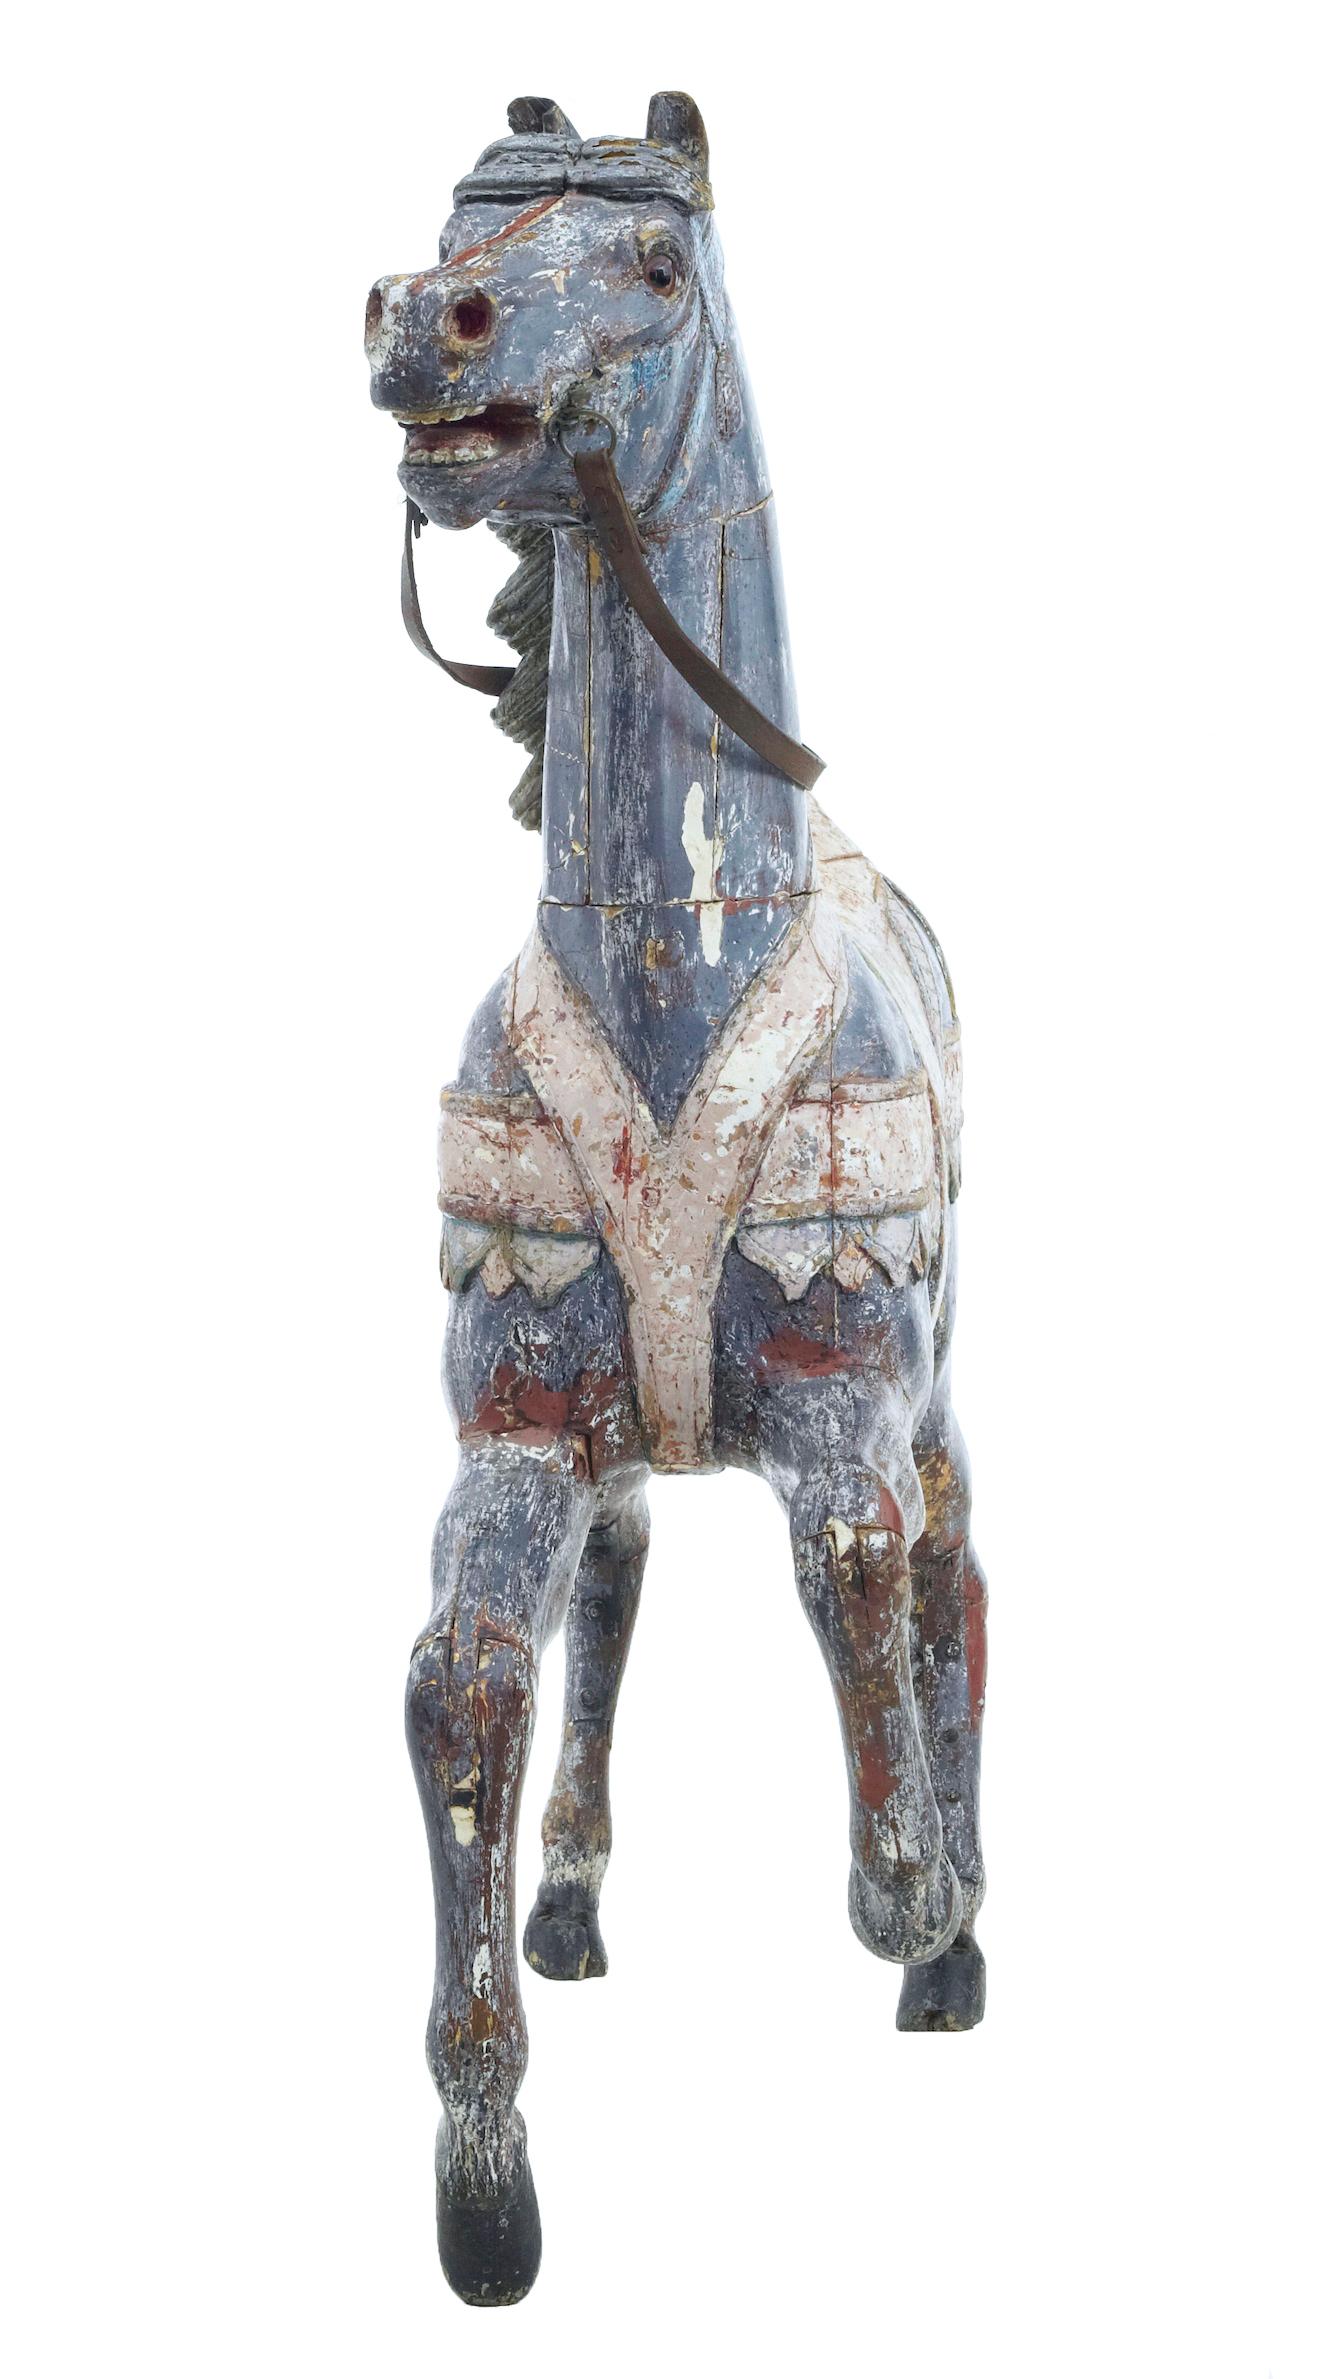 Early 20th century continental decorative carousel horse circa 1900.

Unique continental painted merry-go-round horse circa 1900. Excellent opportunity to own this highly decorative item. Now with its original coats of decorative paint dry